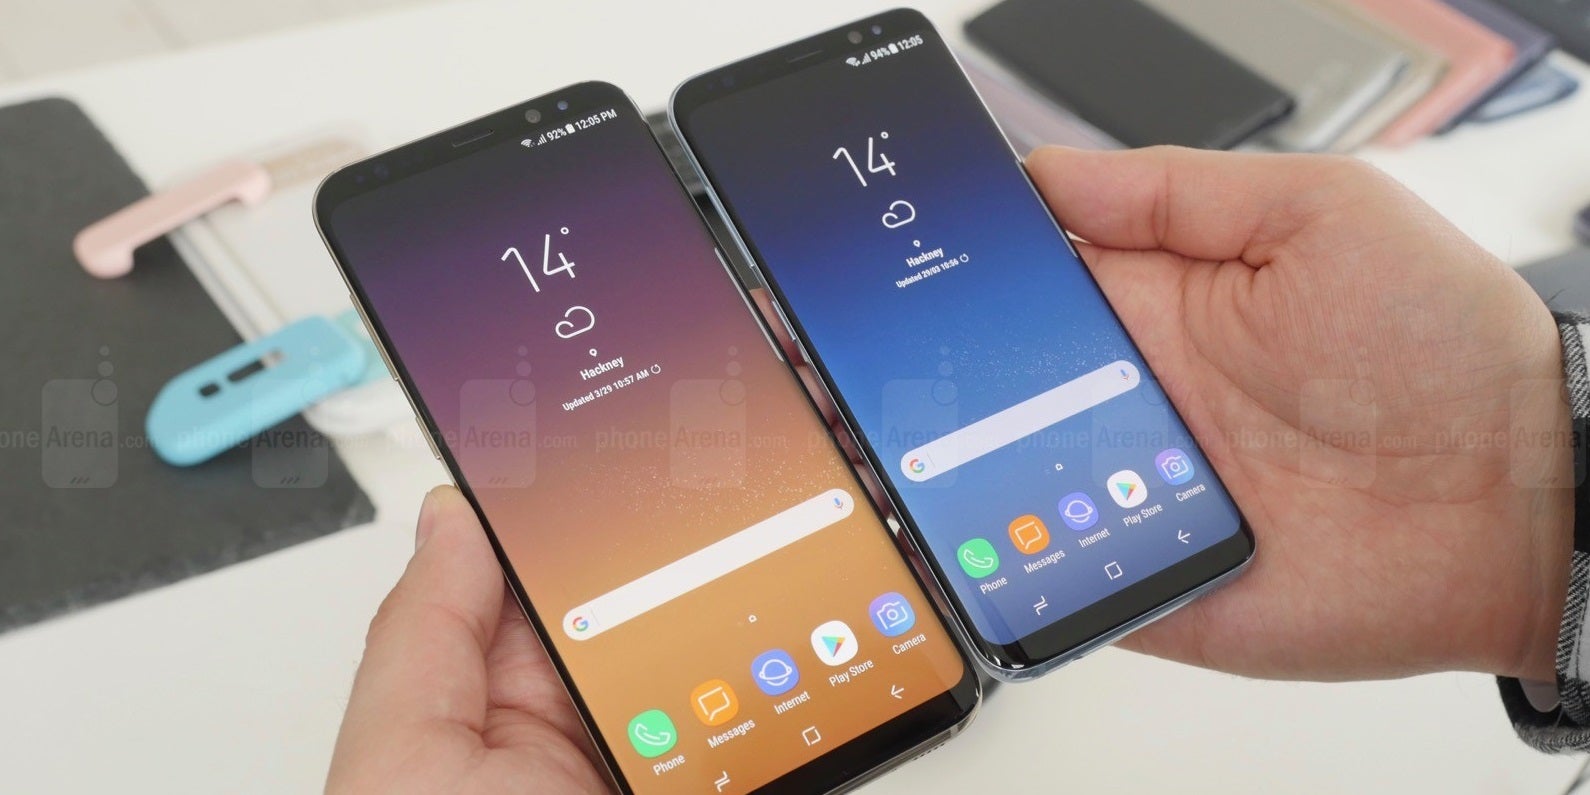 Samsung is no longer being stubborn with the keys arrangement, which is a great thing! - 8 fantastic Samsung Galaxy S8 features that went under the radar